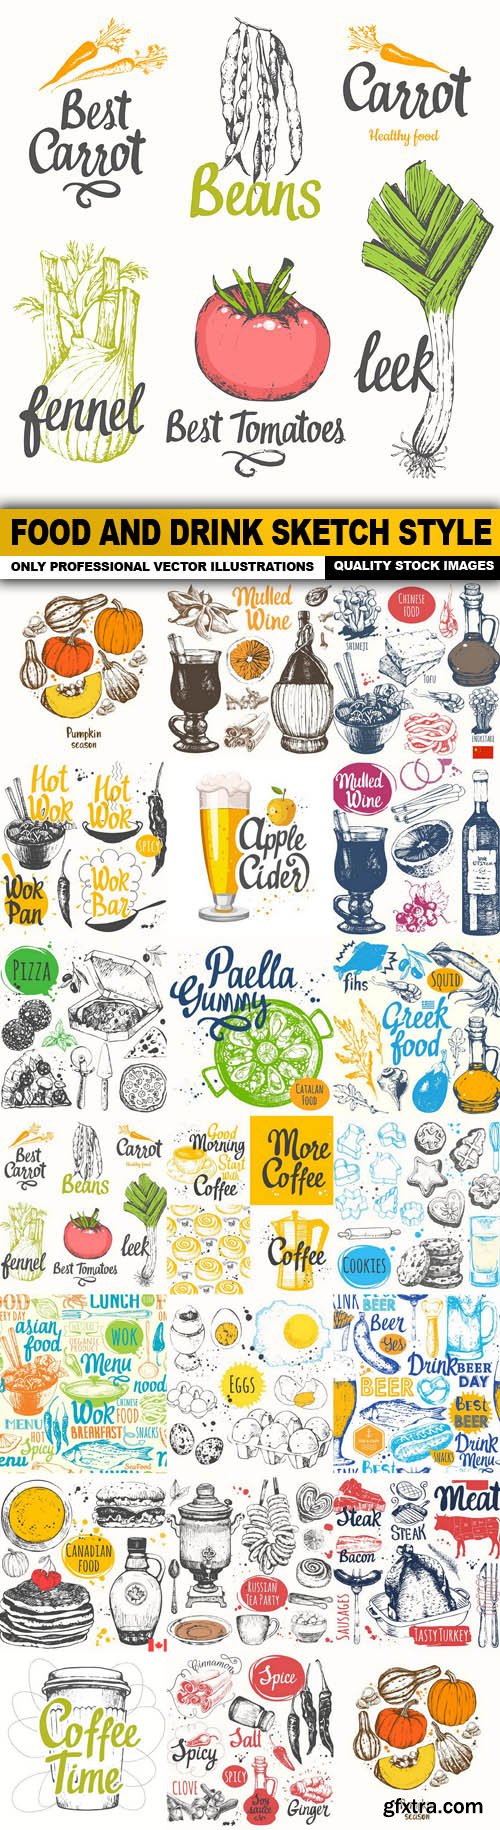 Food And Drink Sketch Style - 20 Vector